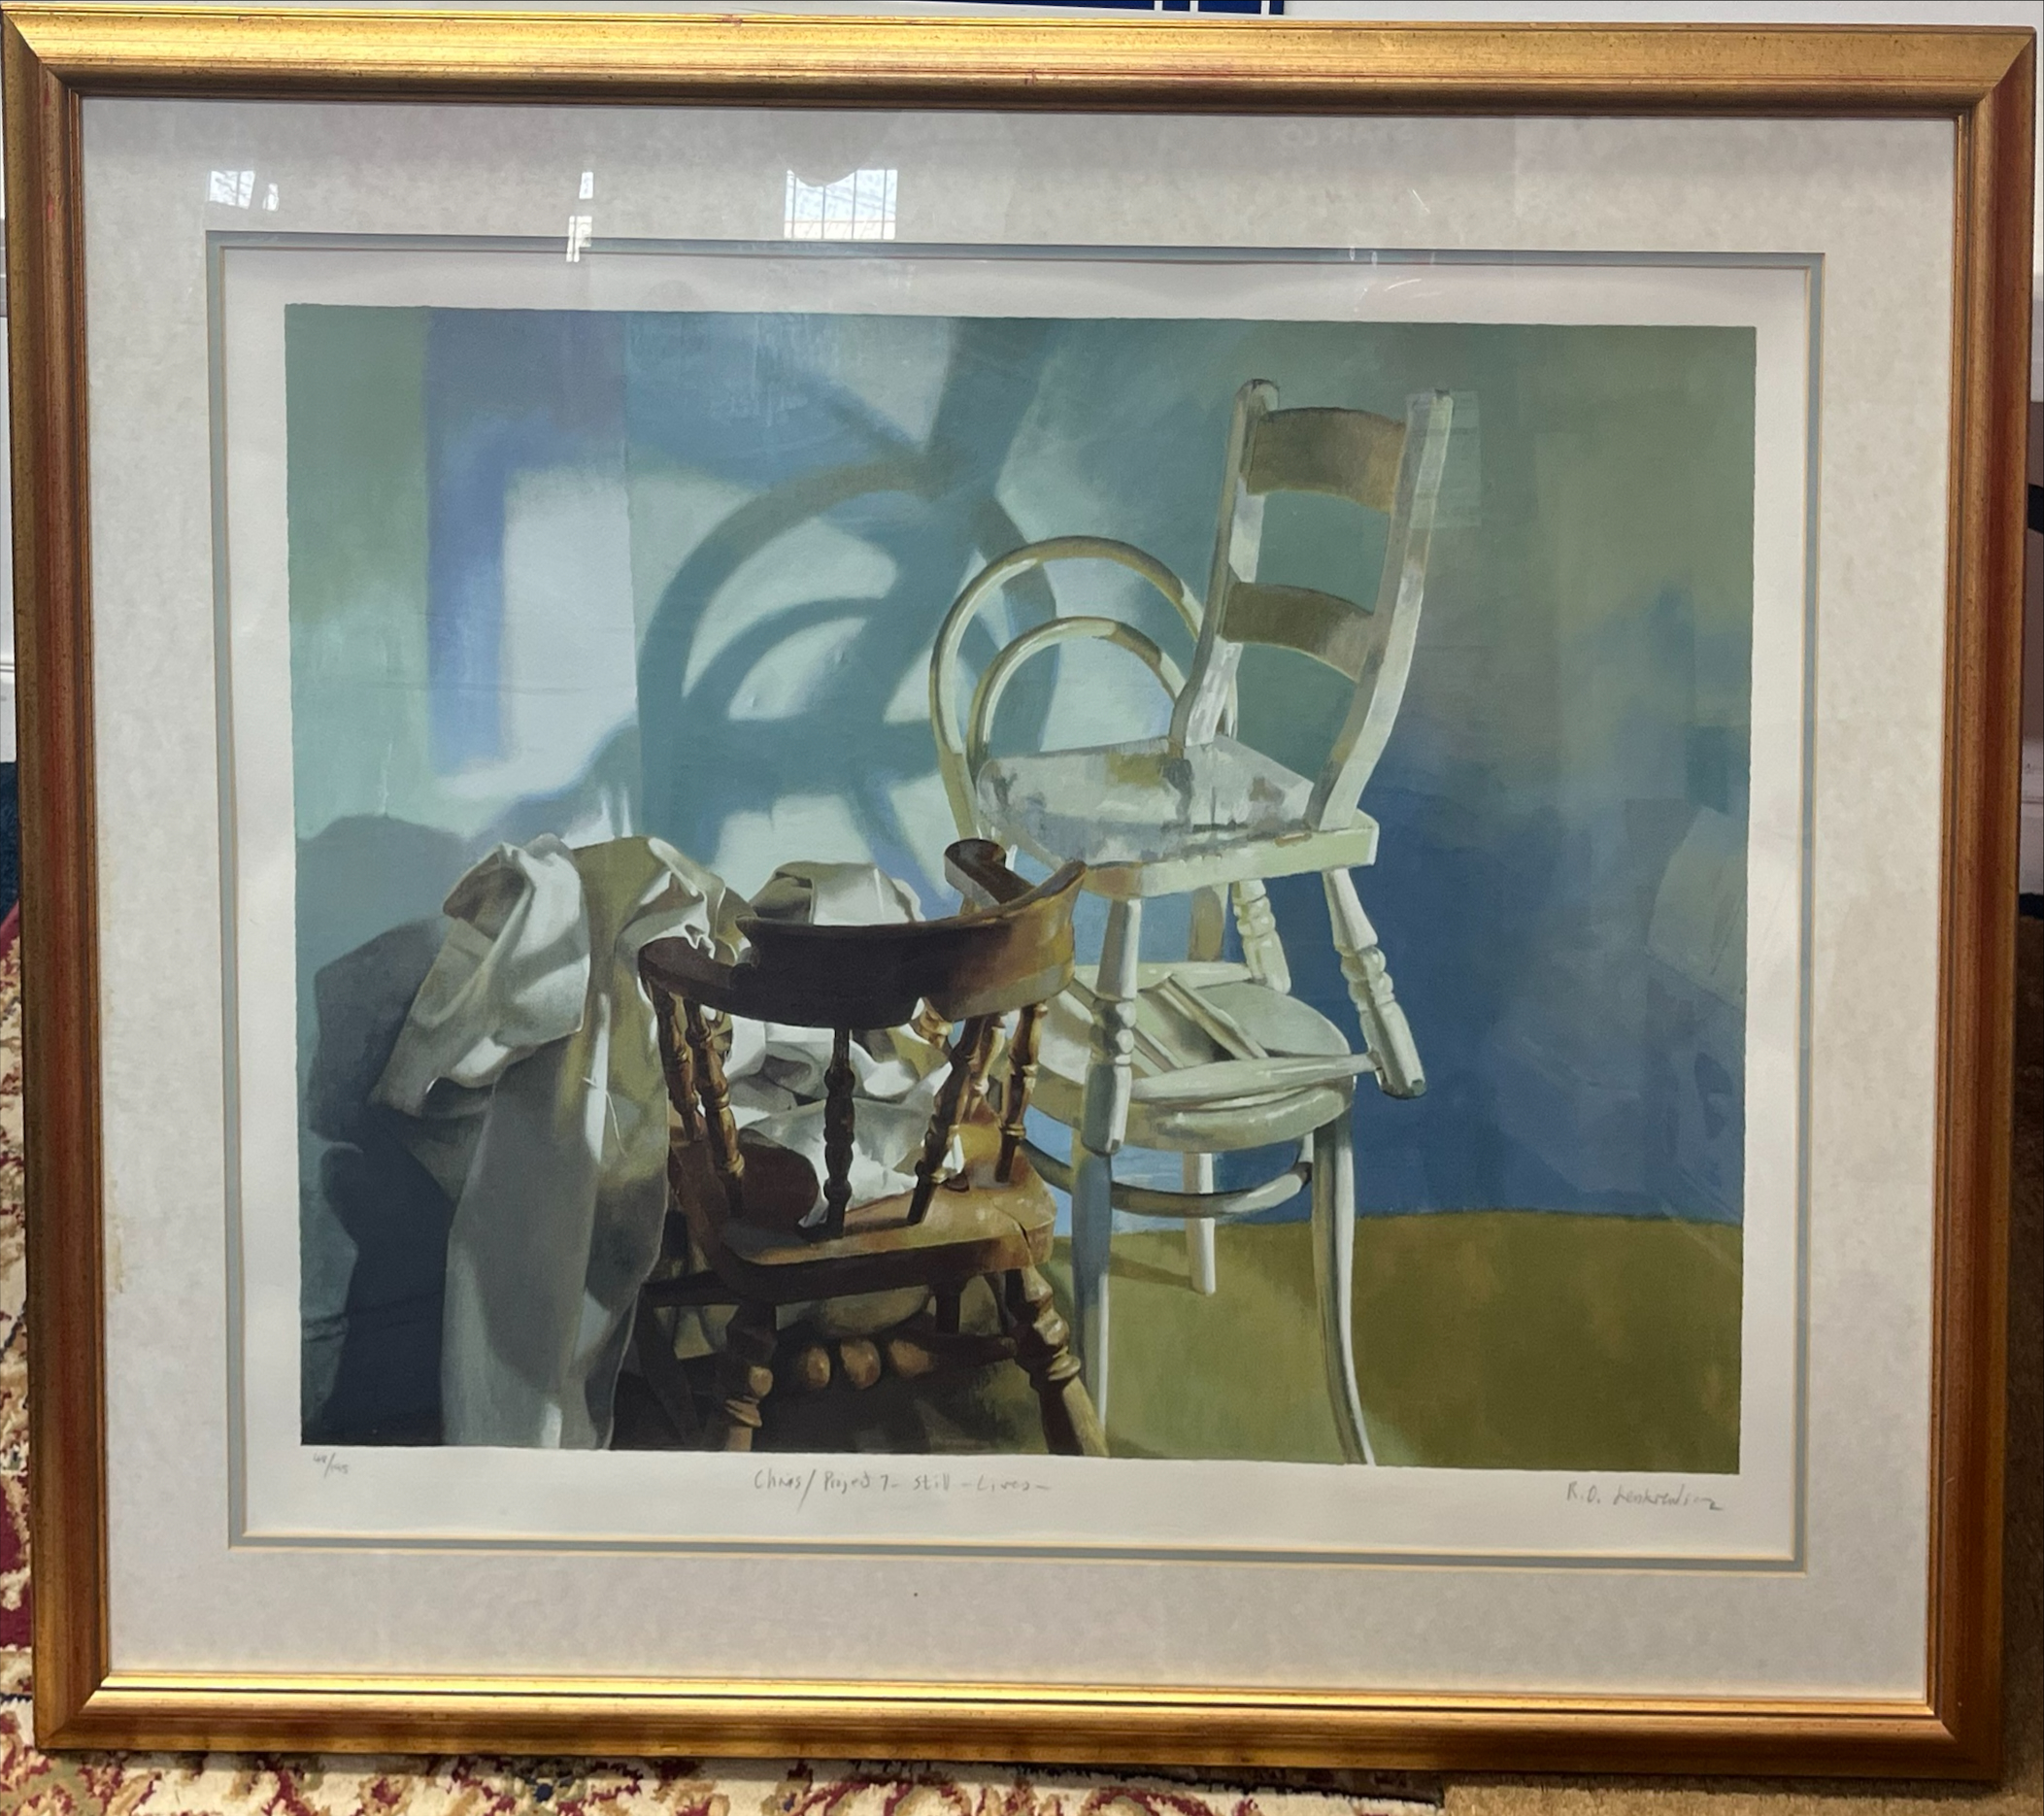 Robert Lenkiewicz (1941-2002), Chairs/Project 7 - Still - Lives, print edition 48/195, signed and